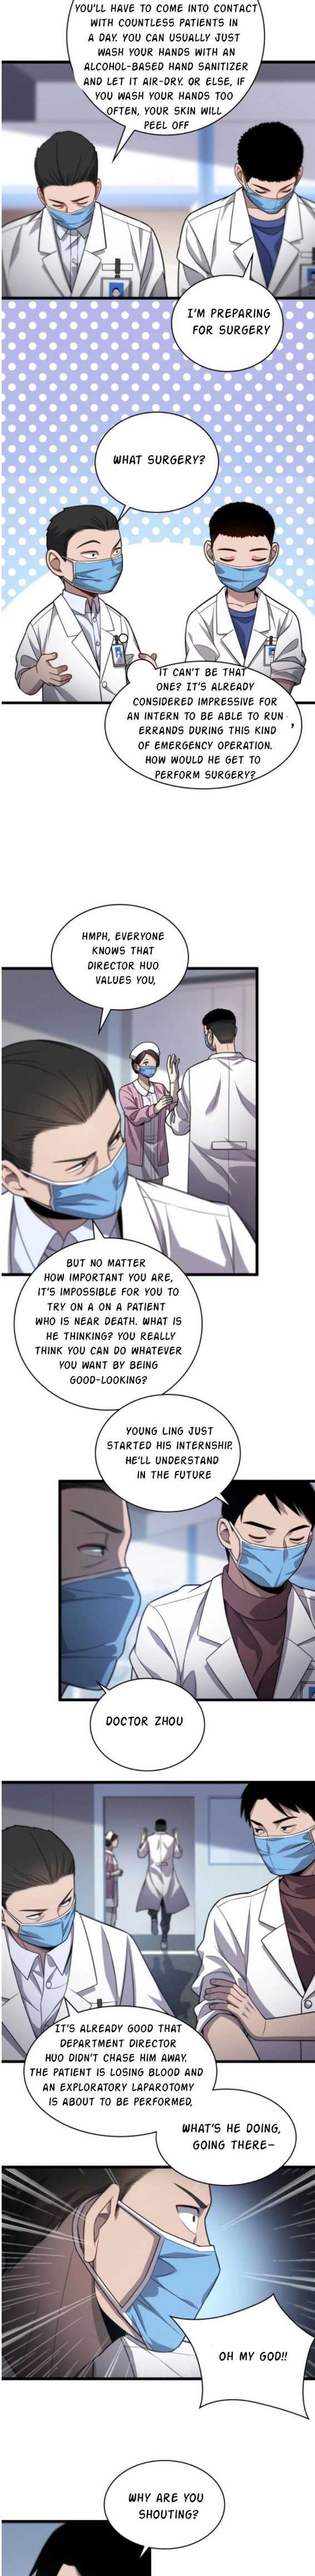 great_doctor_ling_ran_12_6